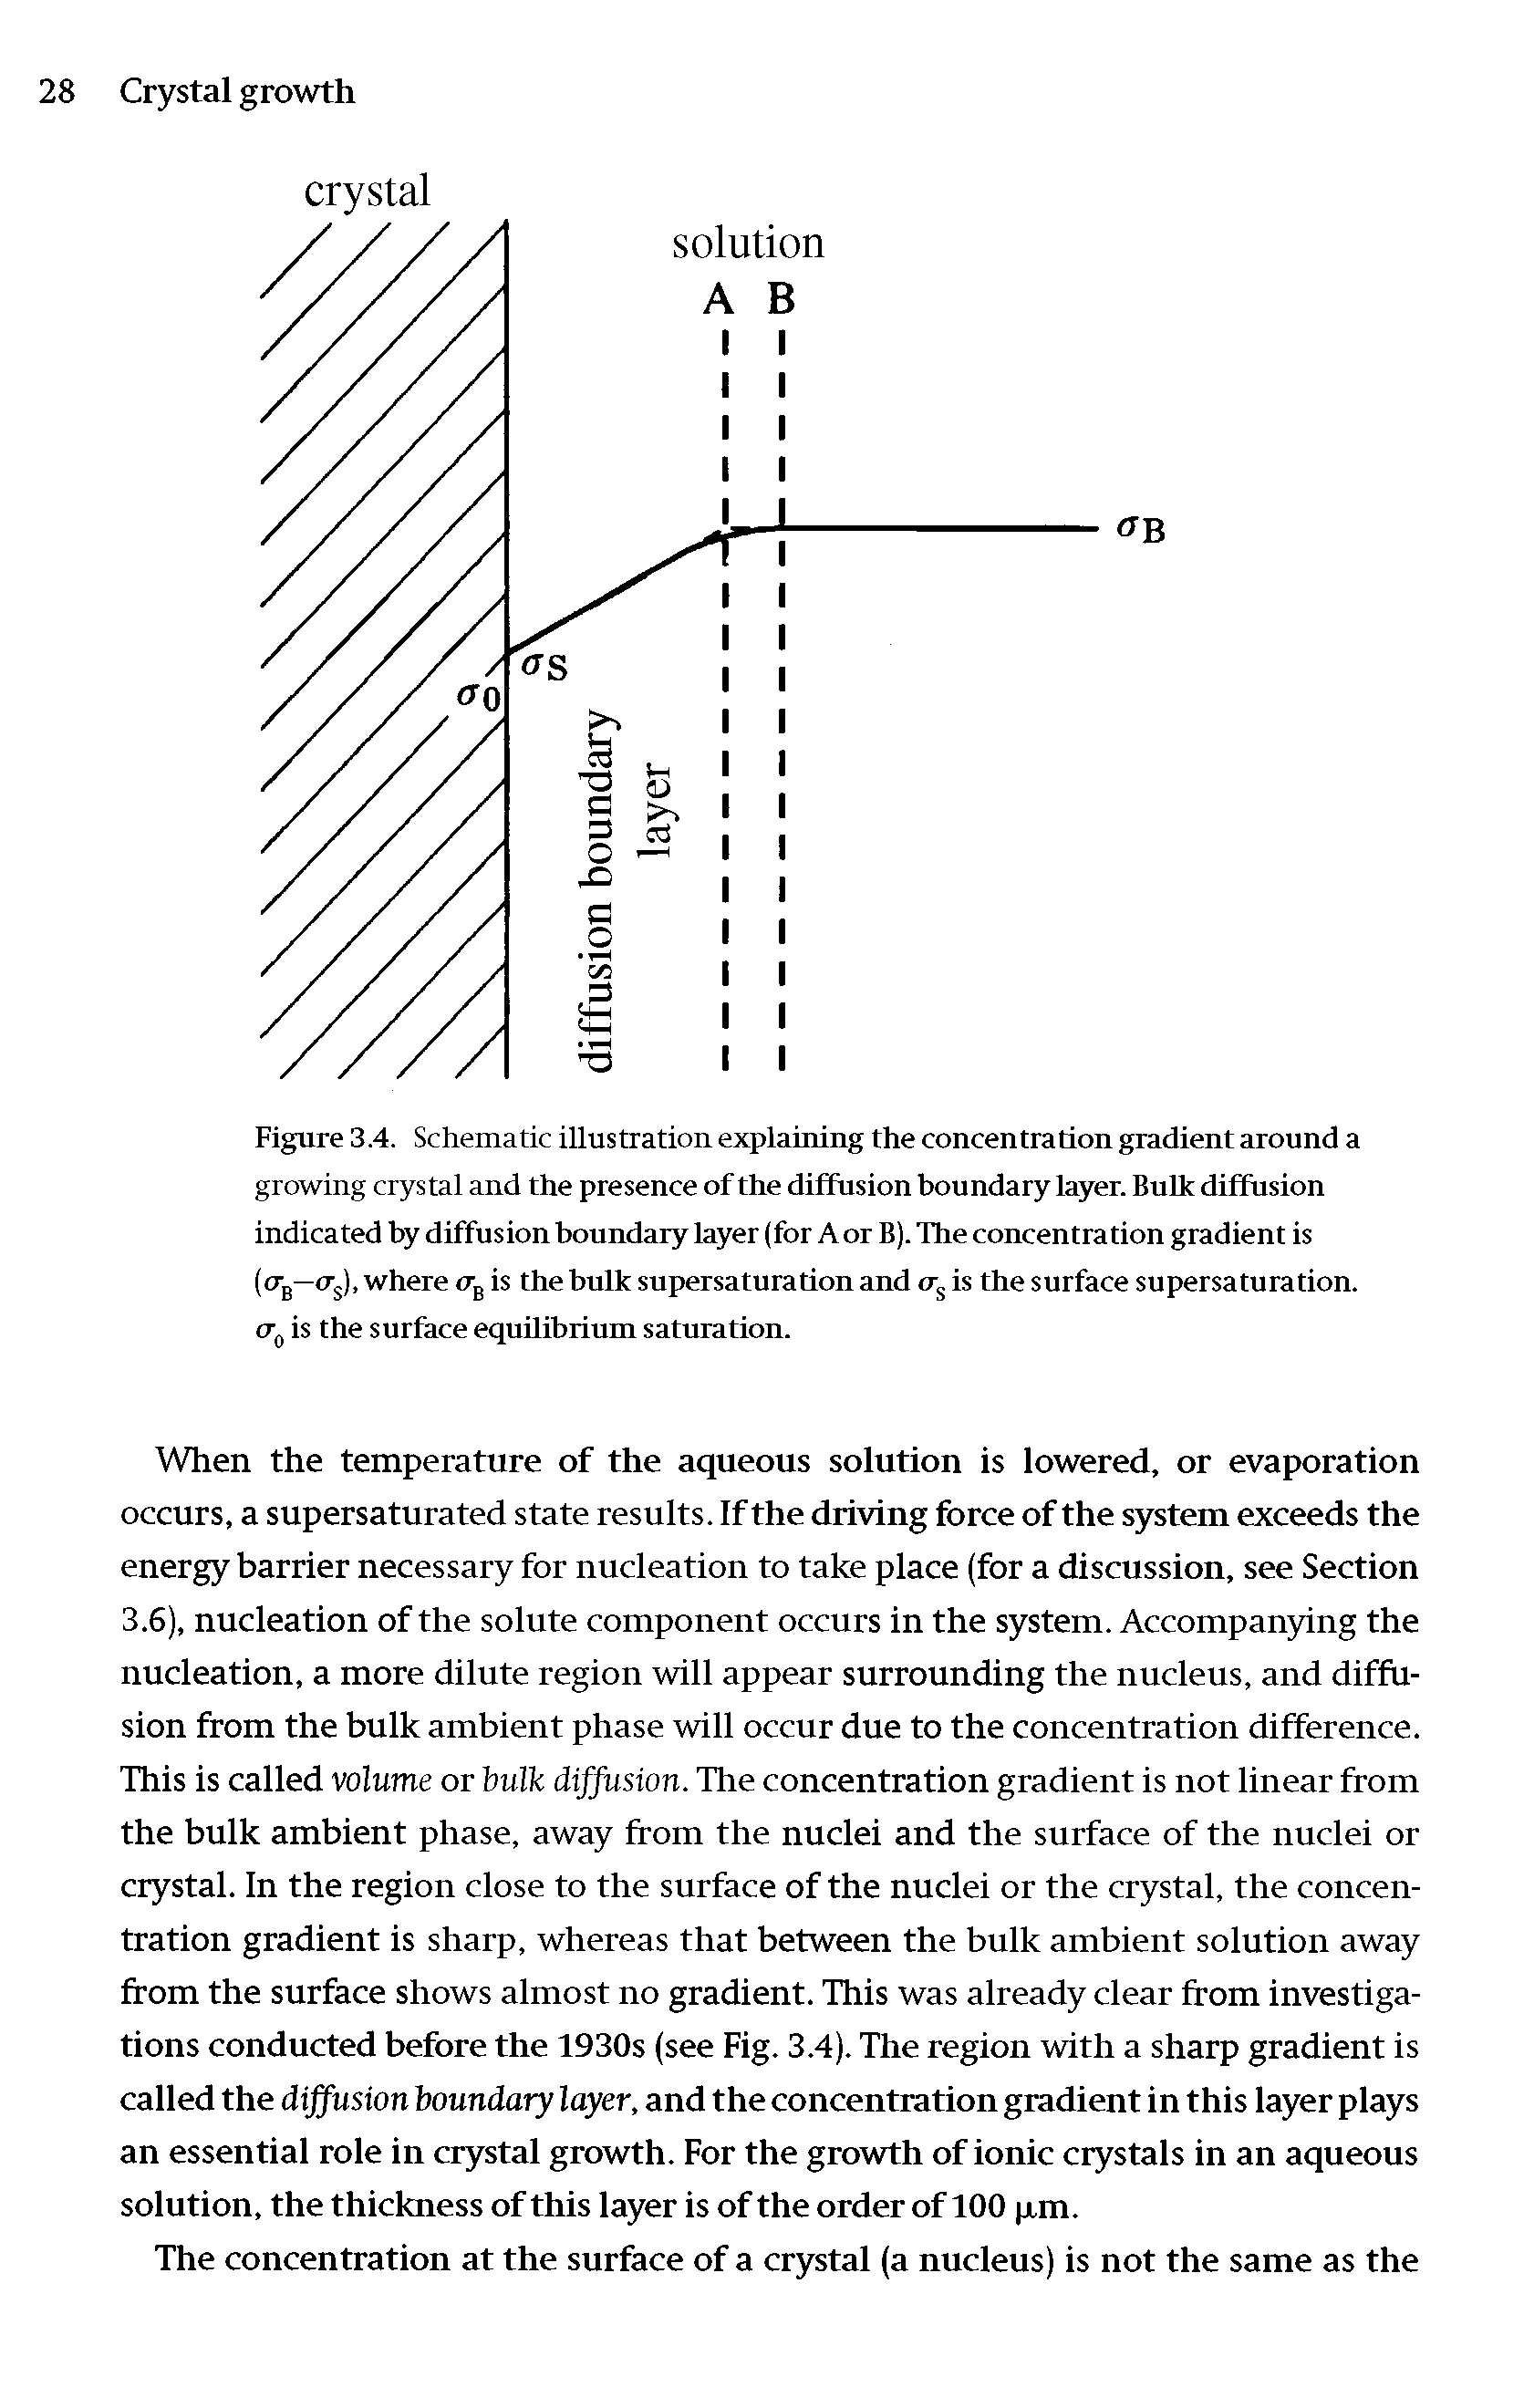 Figure 3.4. Schematic illustration explaining the concentration gradient around a growing crystal and the presence of the diffusion boundary layer. Bulk diffusion indicated by diffusion boundary layer (for Aor B). The concentration gradient is (cTg—(Tj), where <7g is the bulk supersaturation and cr is the surface supersaturation. (7(, is the surface equilibrium saturation.